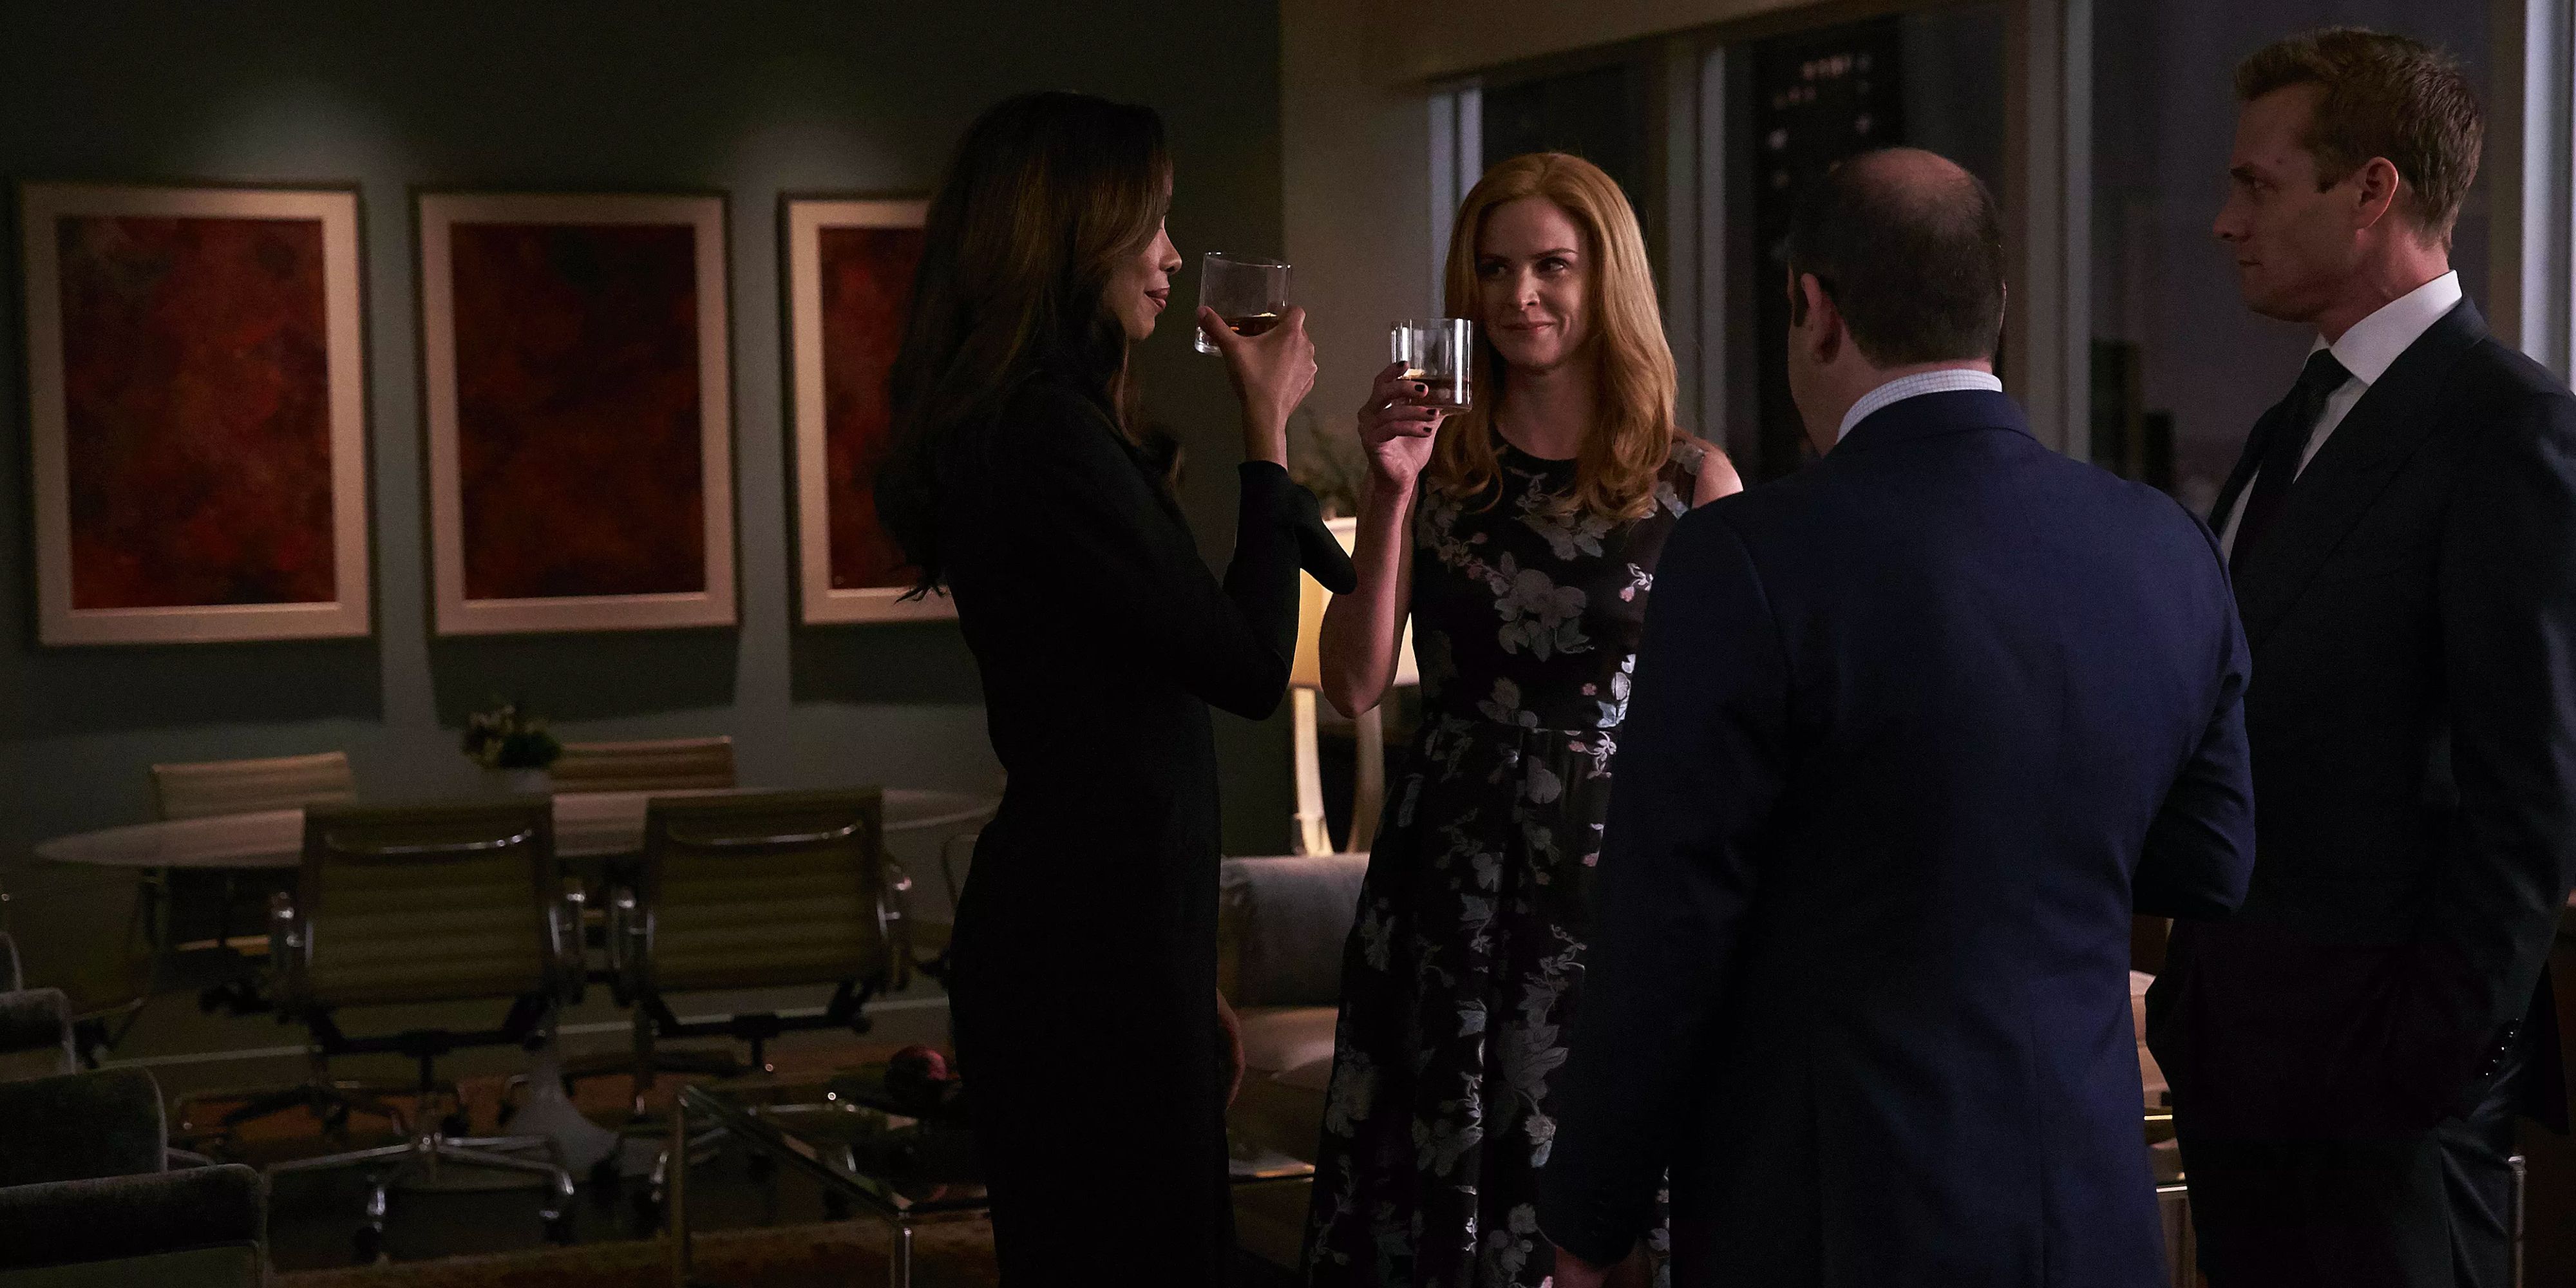 Jessica, Donna, Louis, and Harvey raise a toast in the office at night.